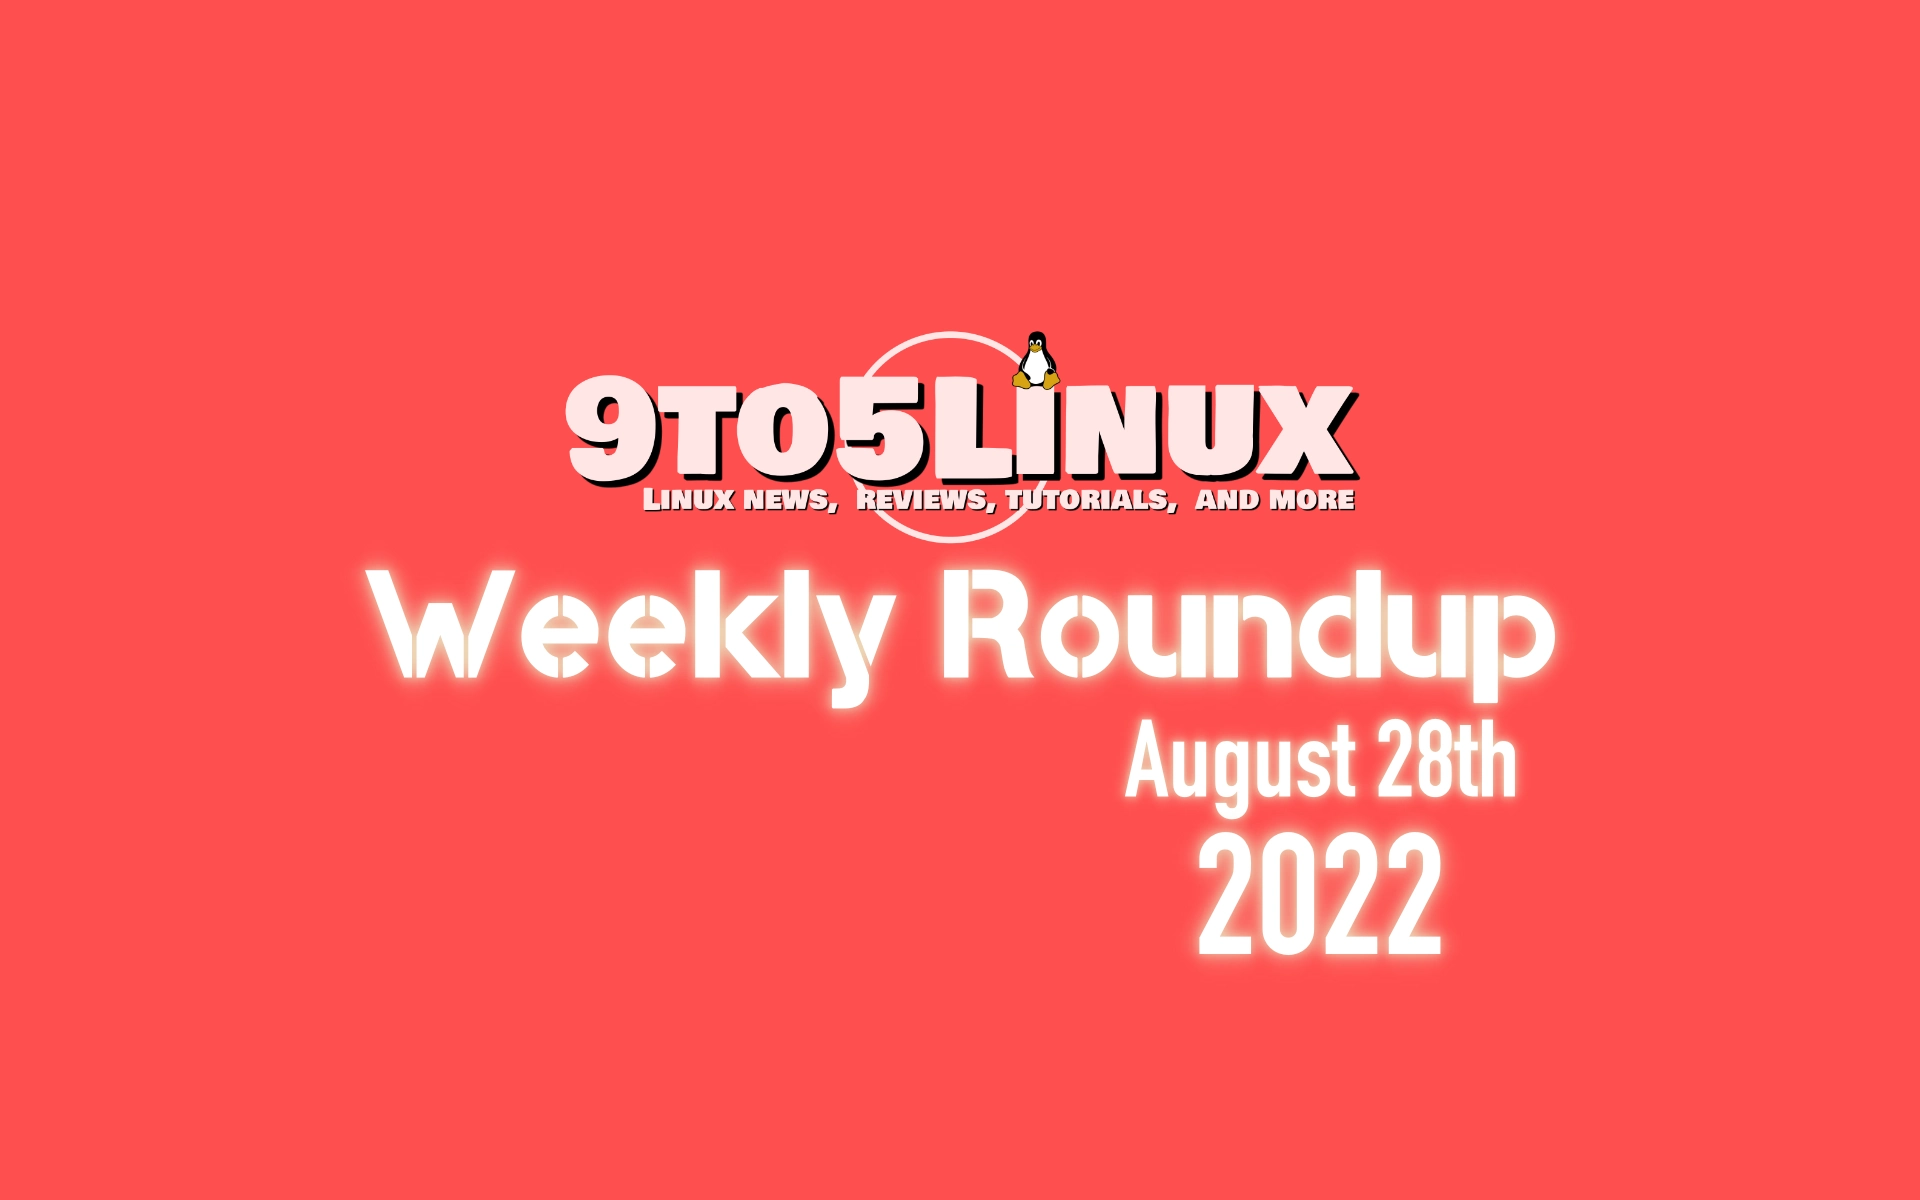 9to5Linux Weekly Roundup: August 28th, 2022